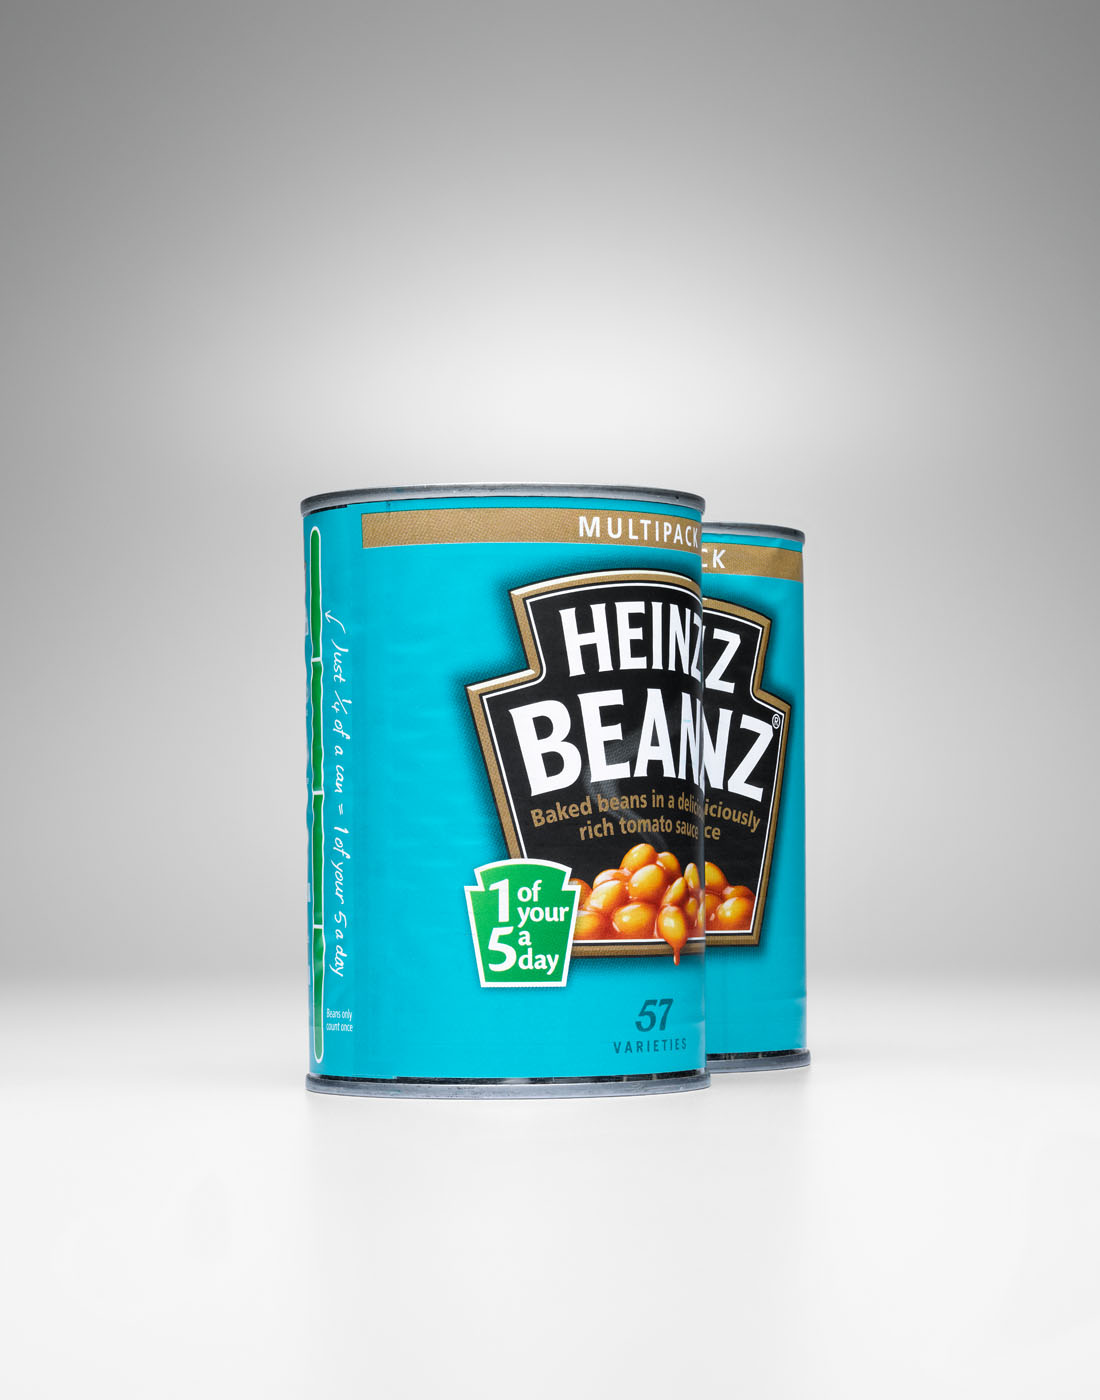 Heinz cans joining together by Alexander Kent London based still life and product photographer.